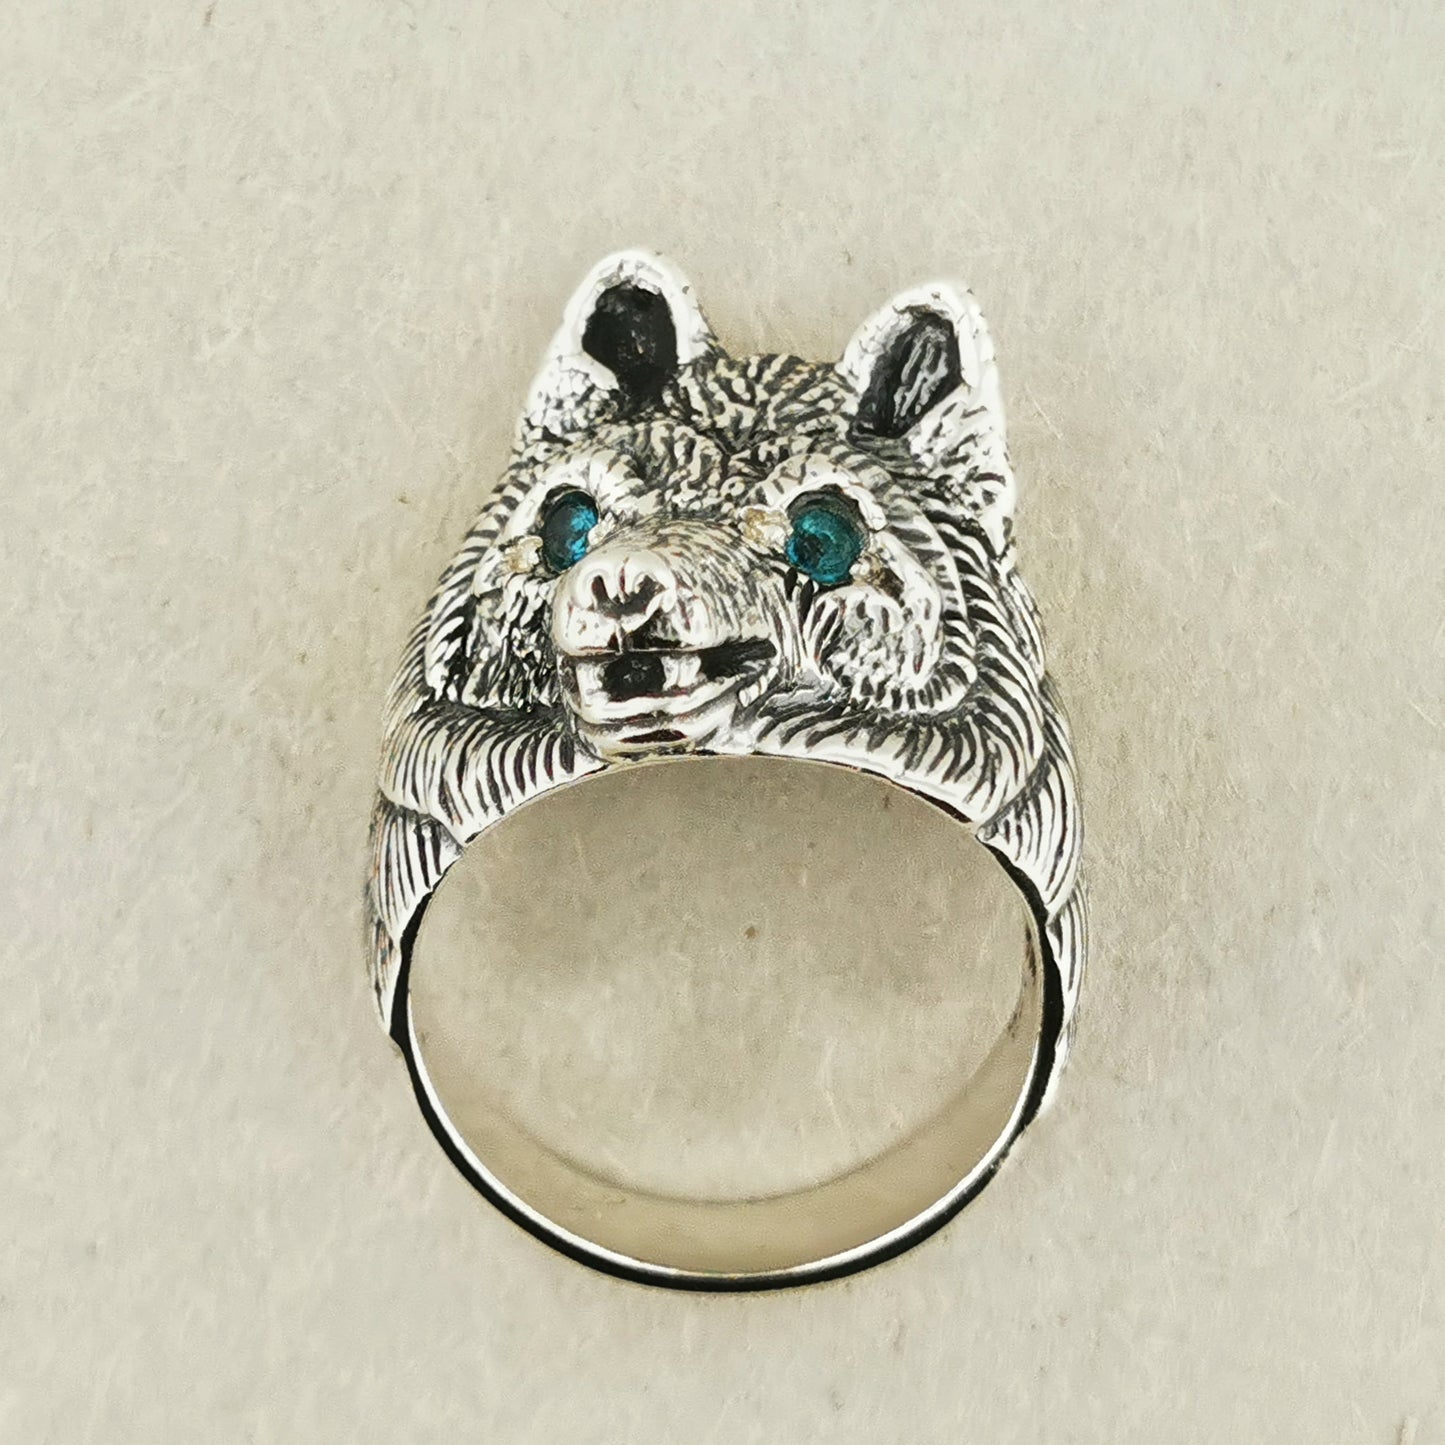 Wolf Ring with Gemstone Eyes in 925 Silver, Large Wolf Head Ring, Mens Wolf Ring, Silver Wolf Jewelry, Gemtone Wolf Jewellery, Gift For Wolf Lover, Silver Wolf Ring, Gemstone Wolf Ring, Mens Silver Wolf Ring, Birthstone Wolf Ring, 925 Wolf Ring